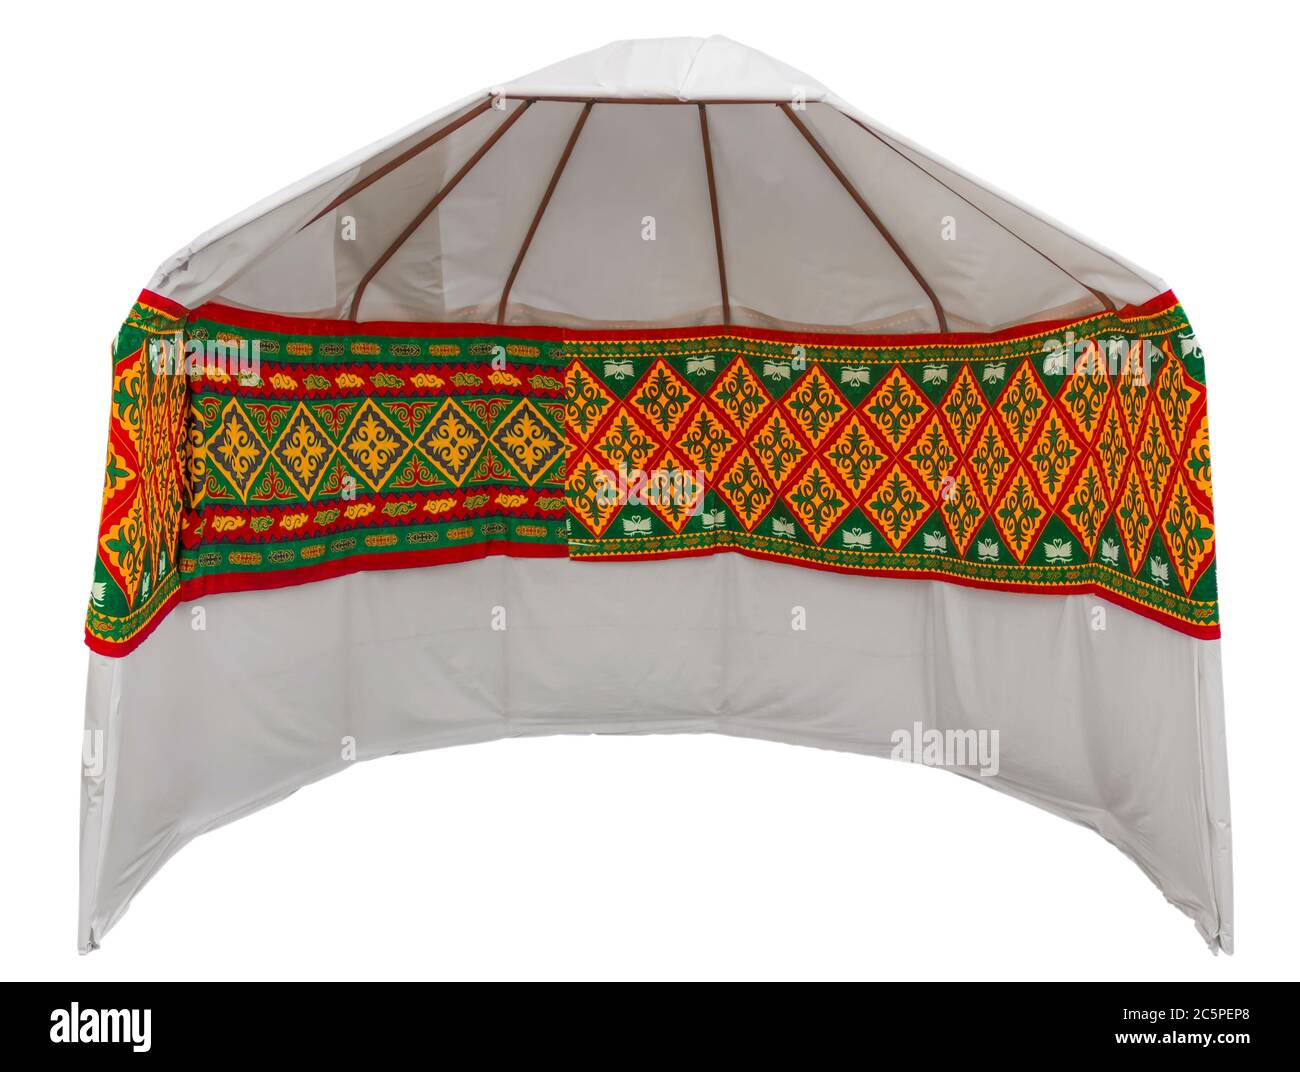 Nomad's yurt tent is the national dwelling of Kazakhstan. Clipping path included. Stock Photo